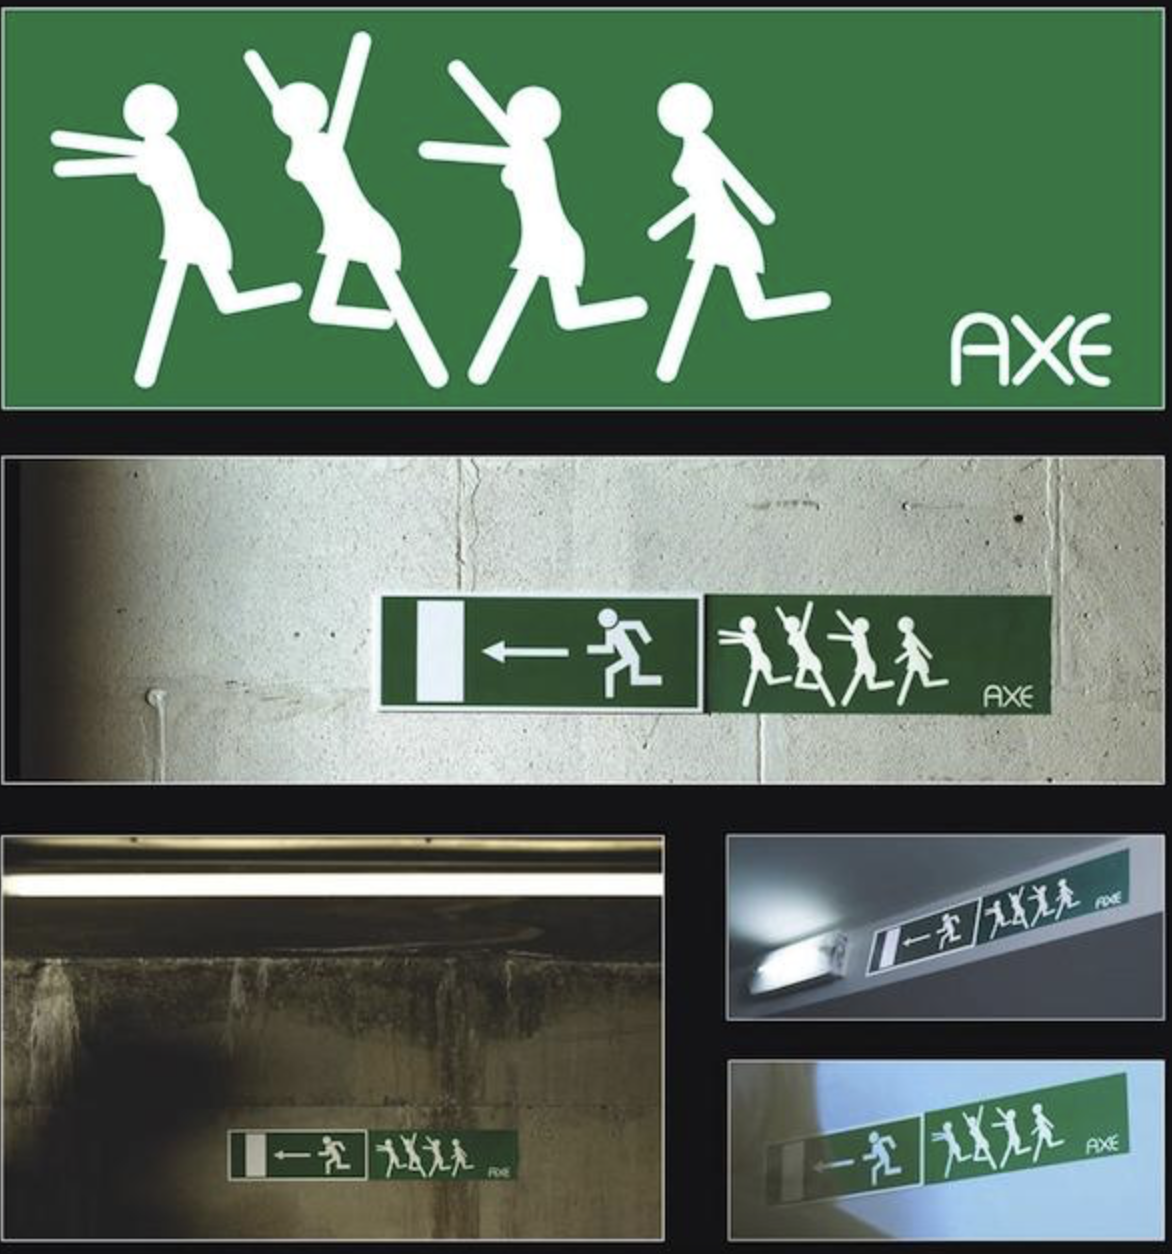 Axe played on existing public signs to convey its brand message